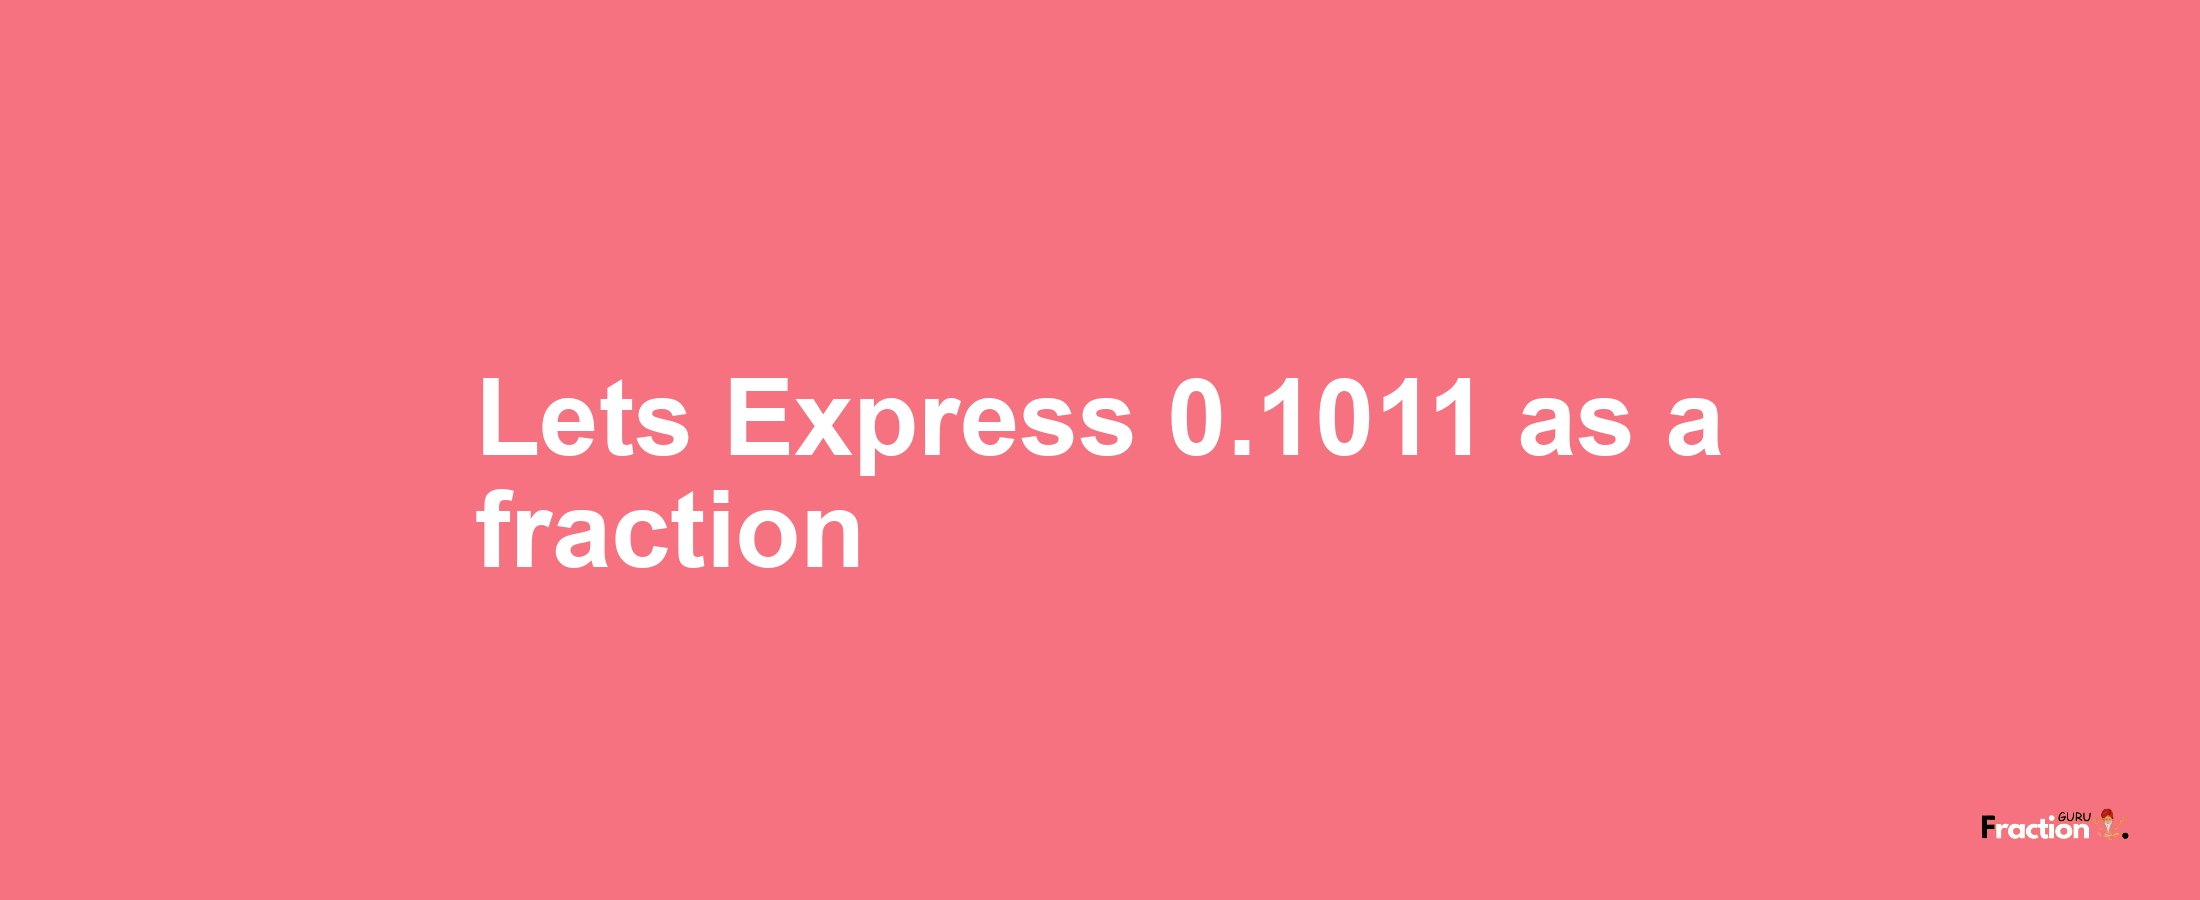 Lets Express 0.1011 as afraction